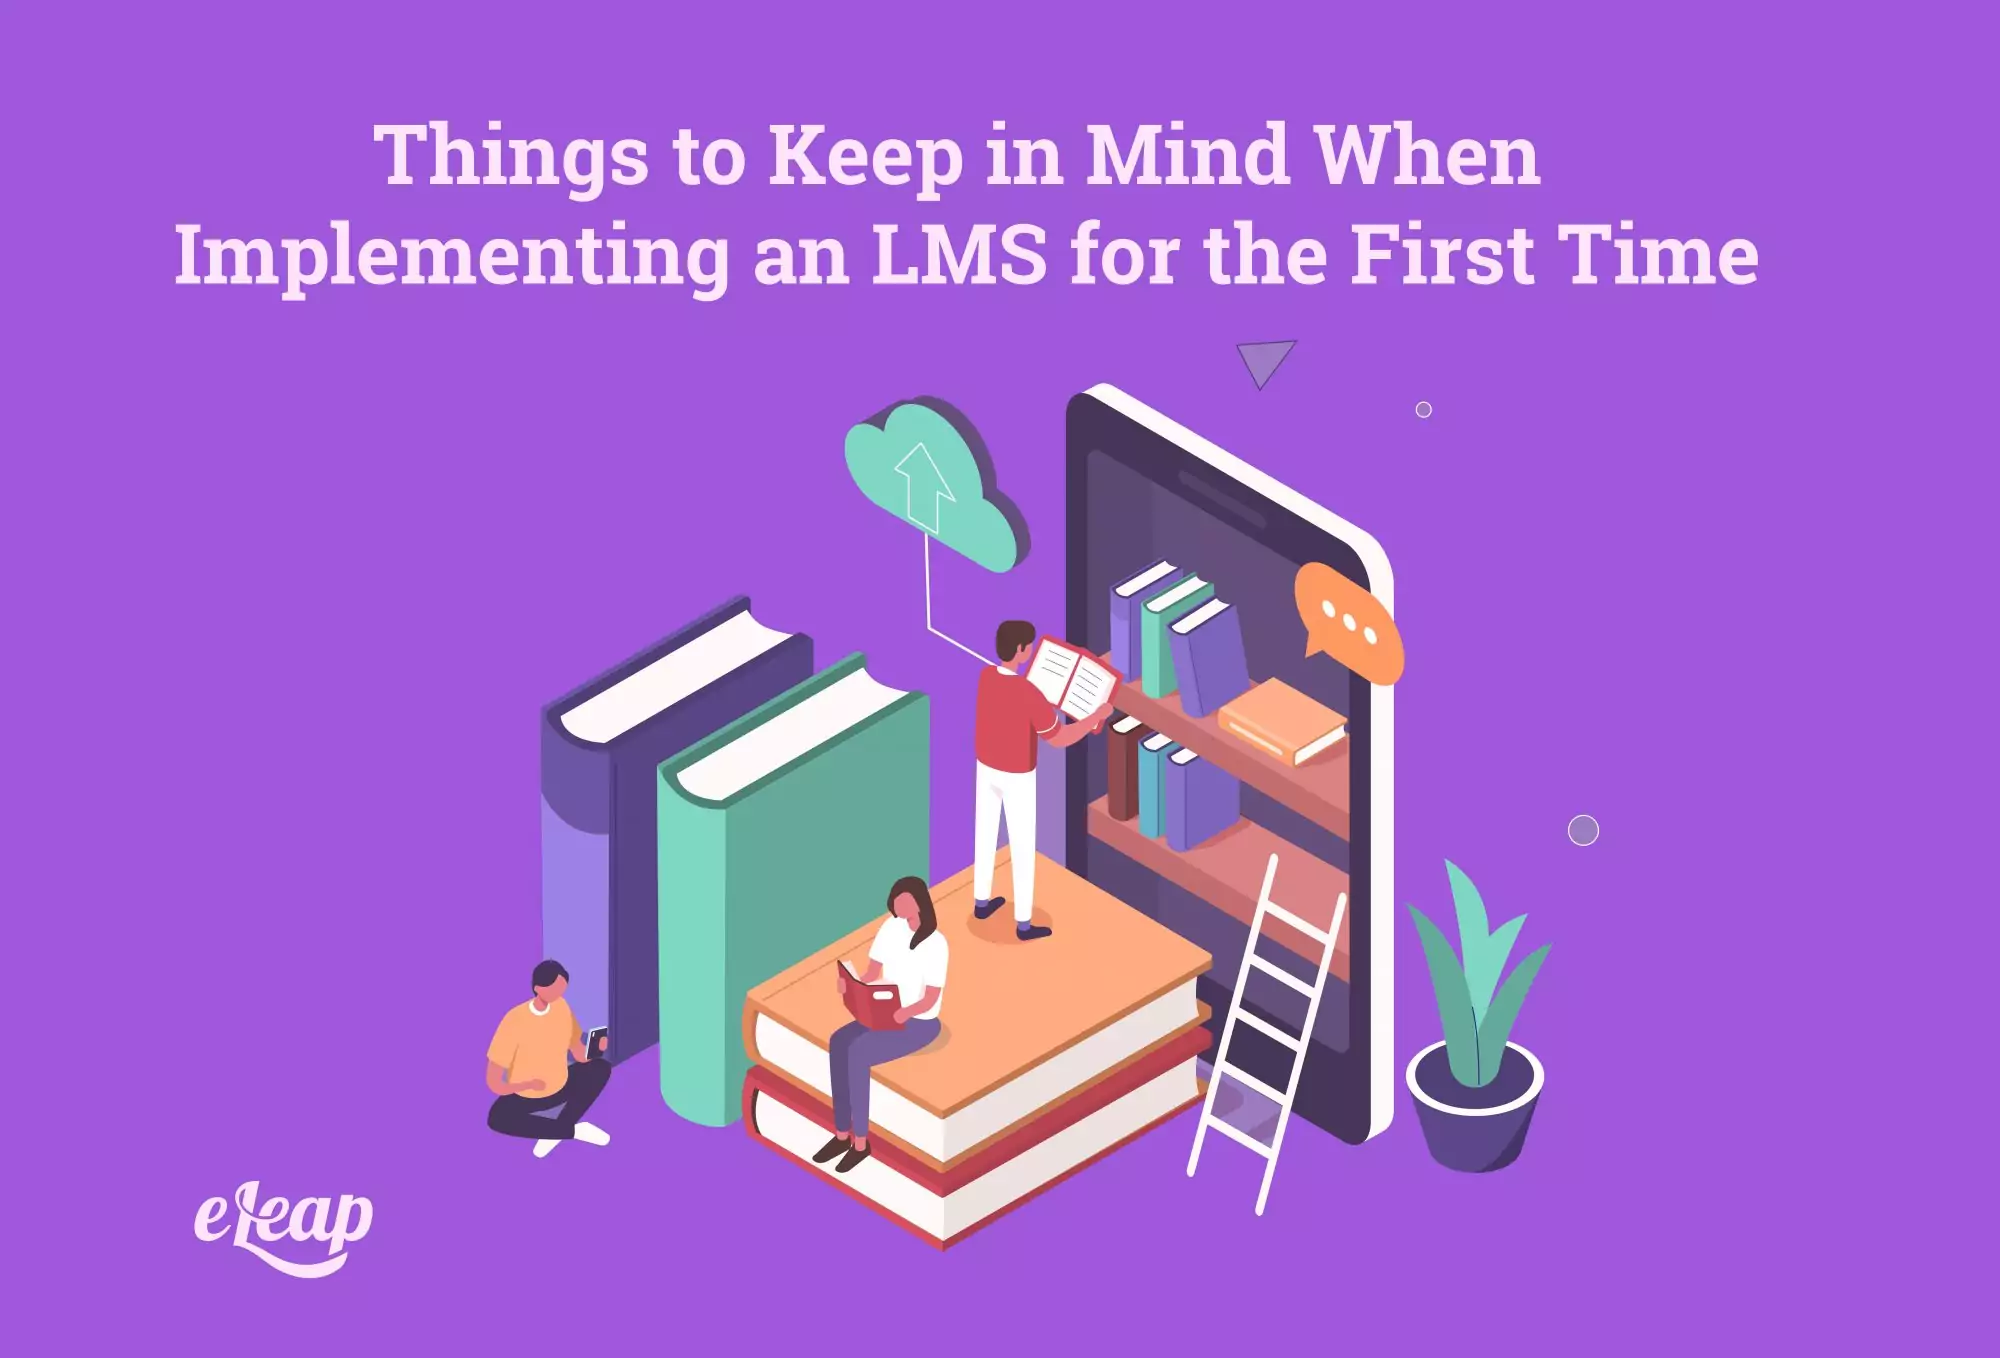 Things to Keep in Mind When Implementing an LMS for the First Time